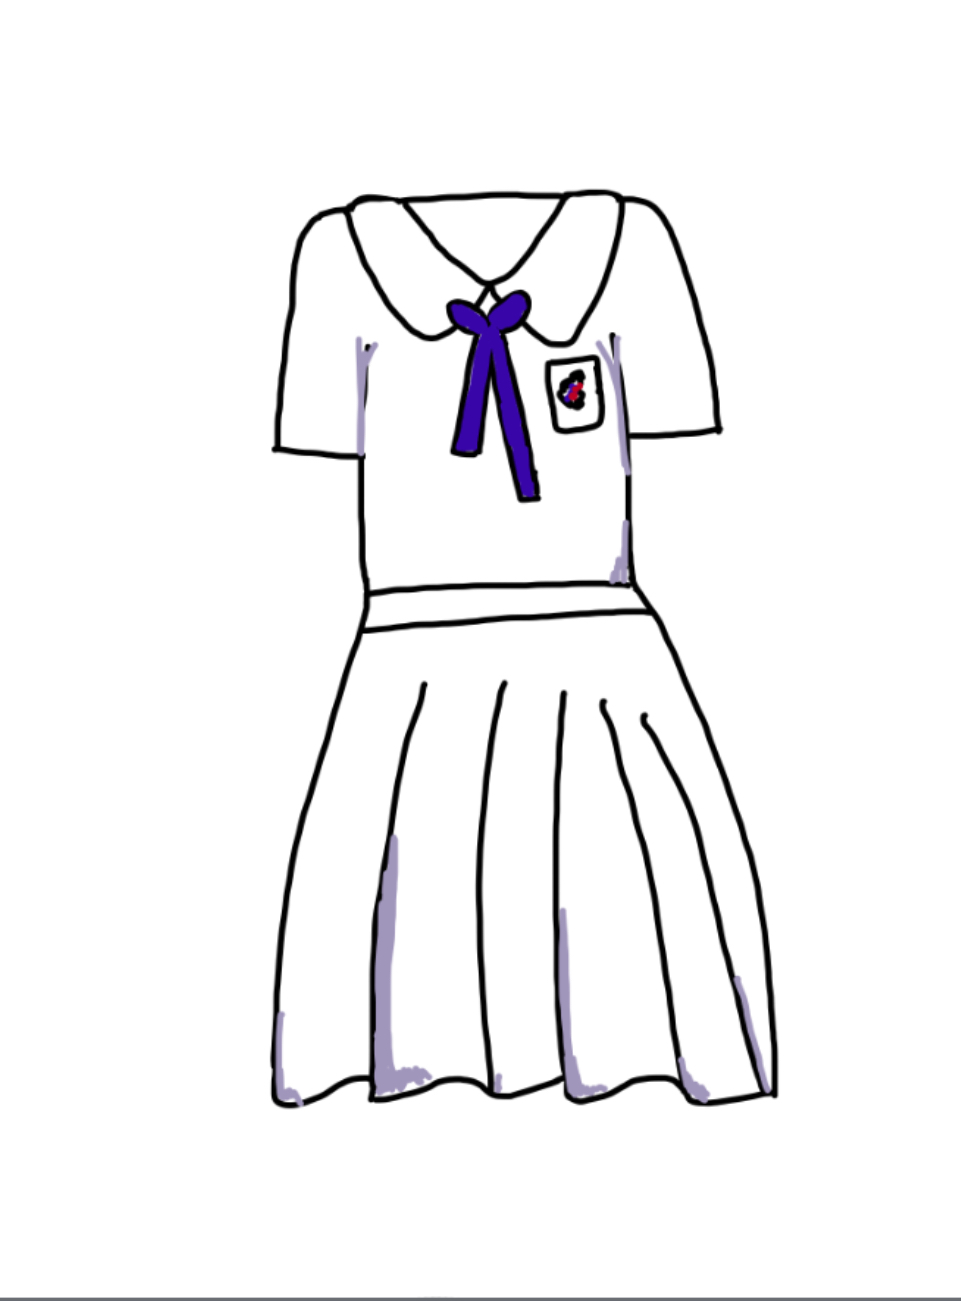 Pui Ching Middle School · HK Secondary School Uniforms